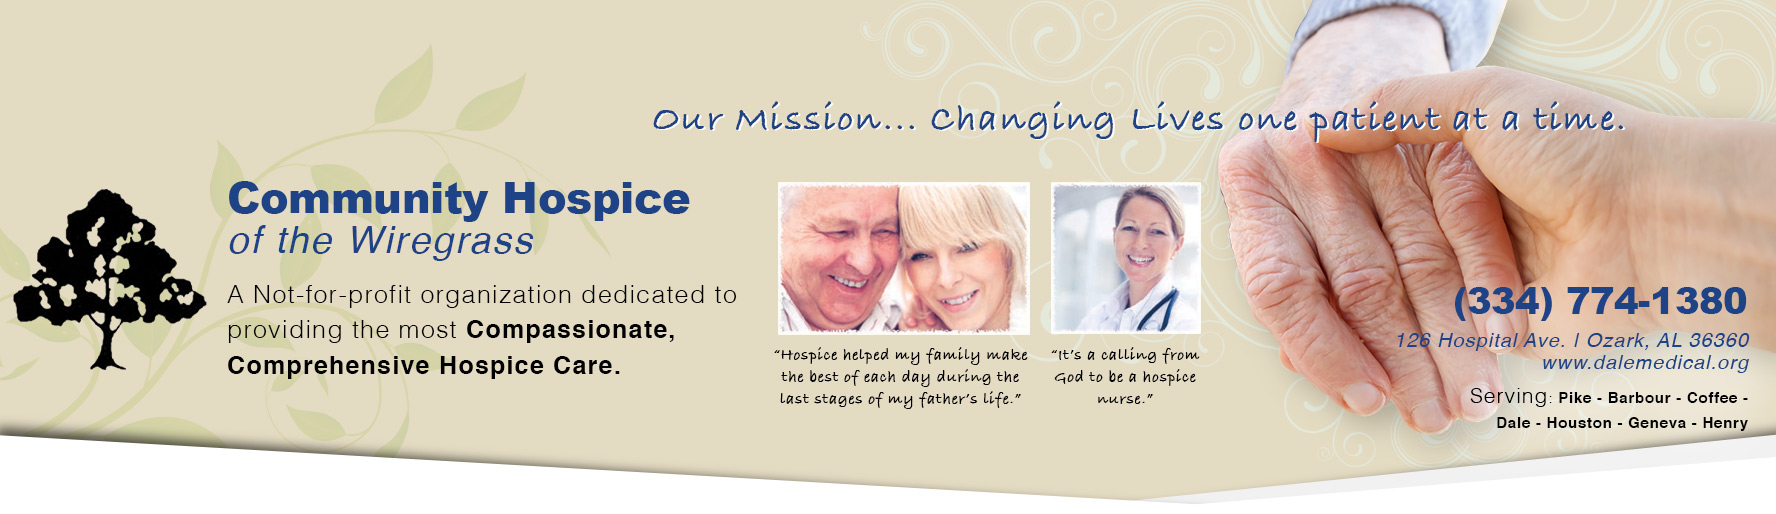 Our Mission...Changing Lives one patient at a time.
Community Hospice of Wiregrass

A not-for-profit organization dedicated to providing the most Compassionate, Comprehensive Hospice Care.

"Hospice helped my family make the best of each day during the last stages of my father's life."
"It's a calling from God to be a hospice Nurse."

(334)774-1380
126 Hospital Ave. | Ozark, AL 36360
www.dalemedical.org

Serving:
Pike
Barbour
Coffee
Dale
Houston
Geneva
Henry